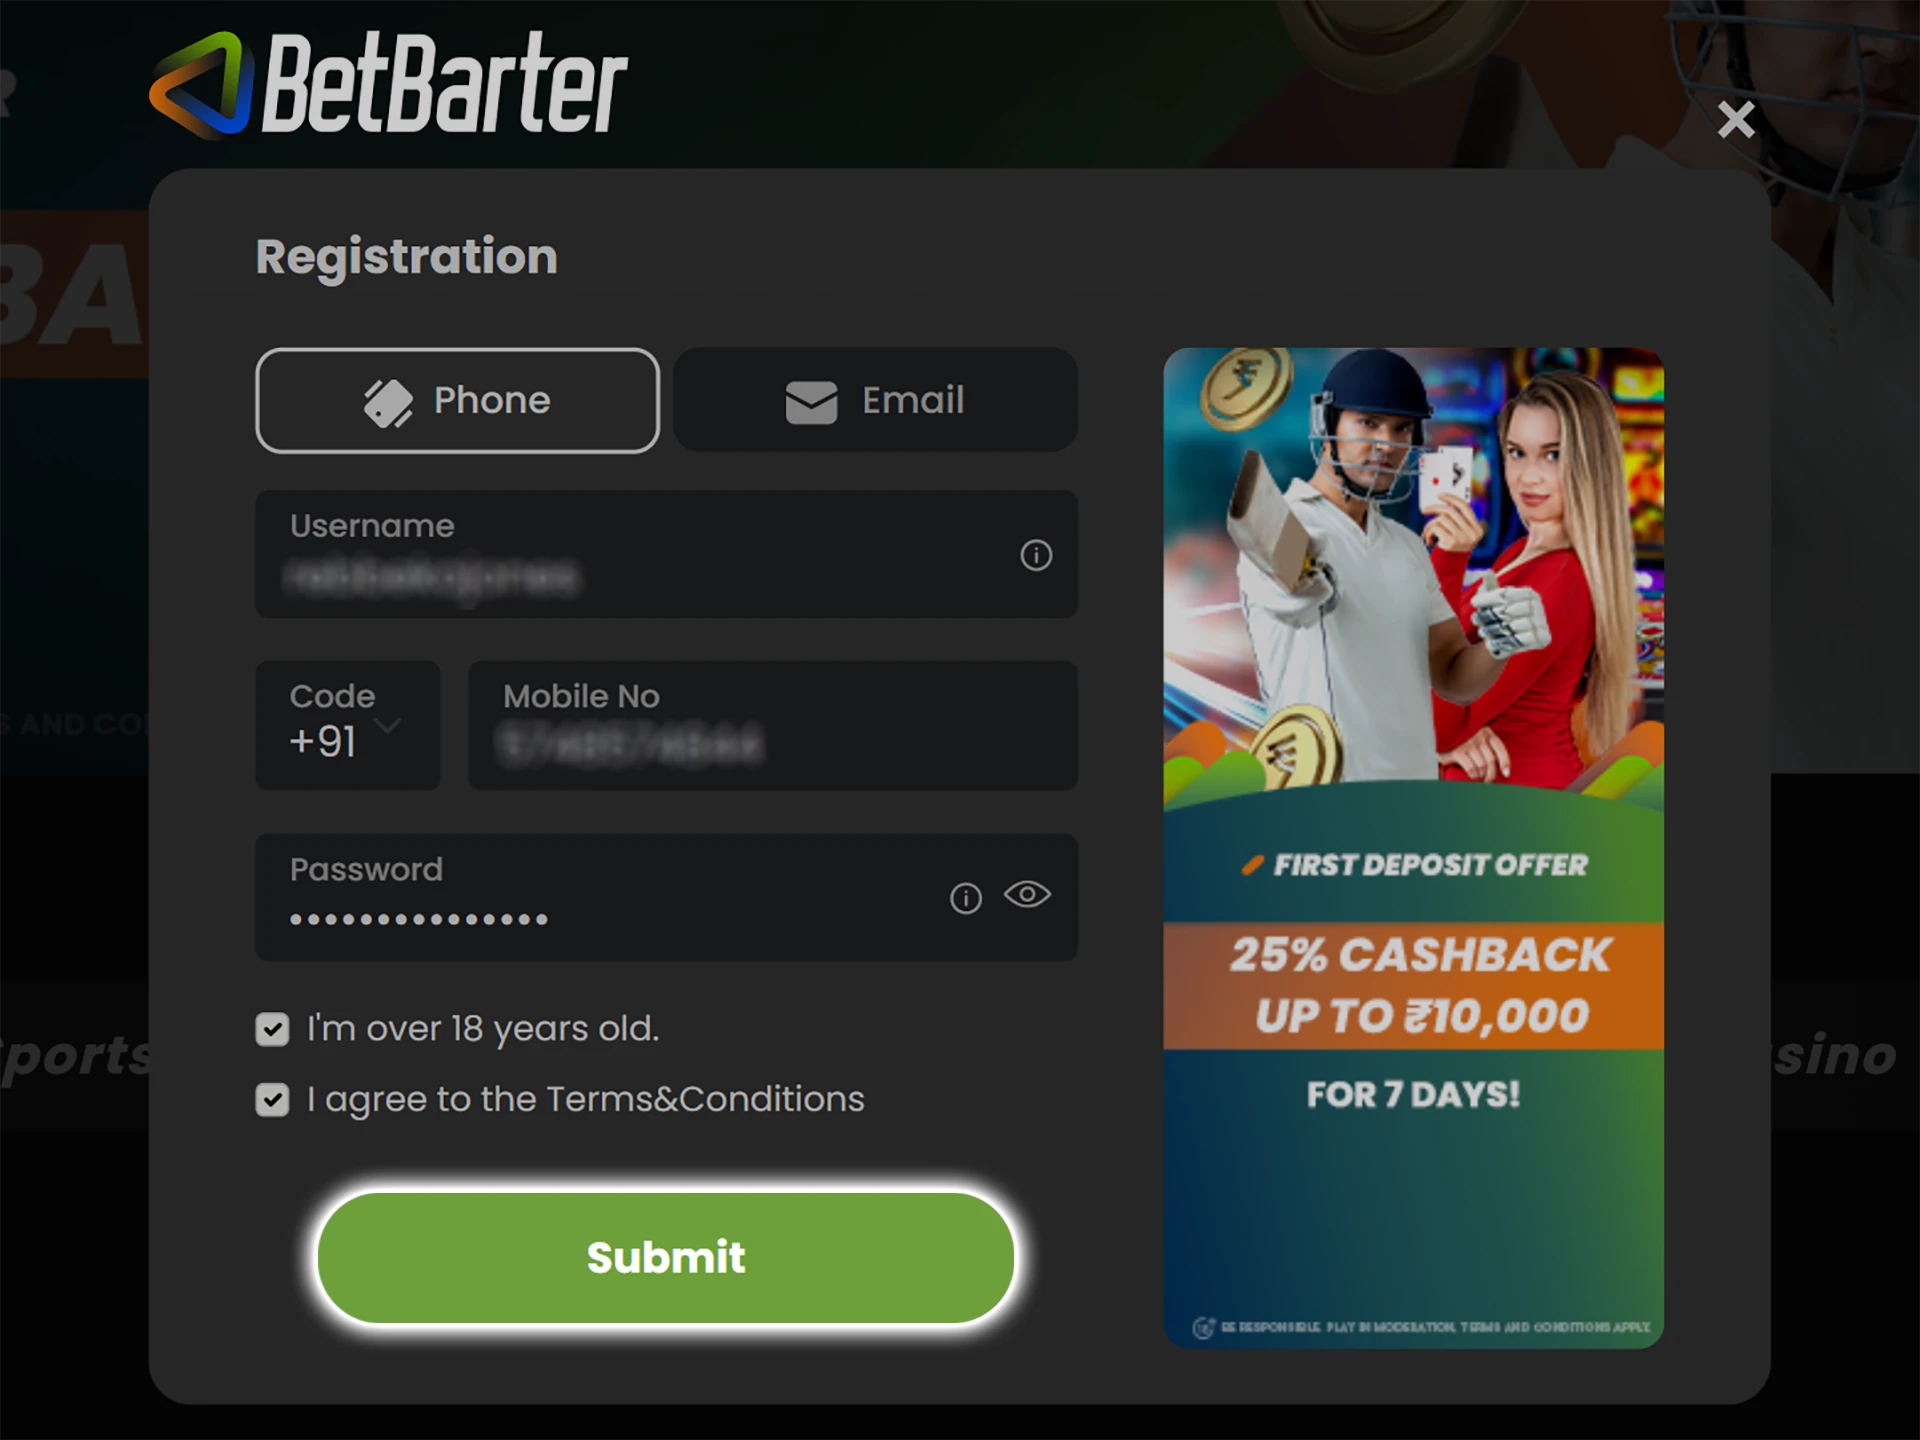 Confirm the creation of your Betbarter account.